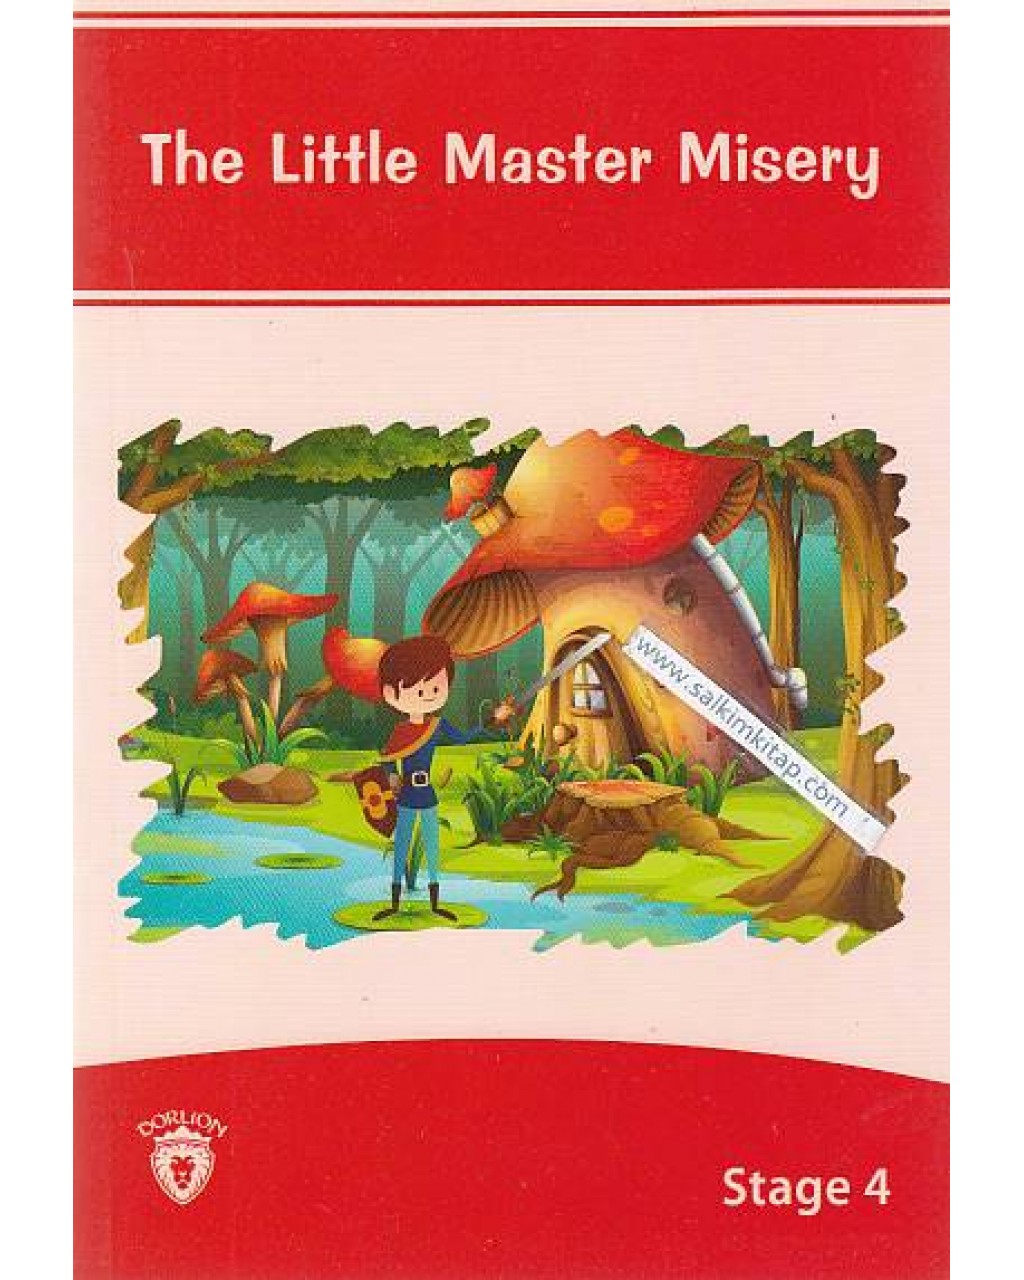 The Little Master Misery